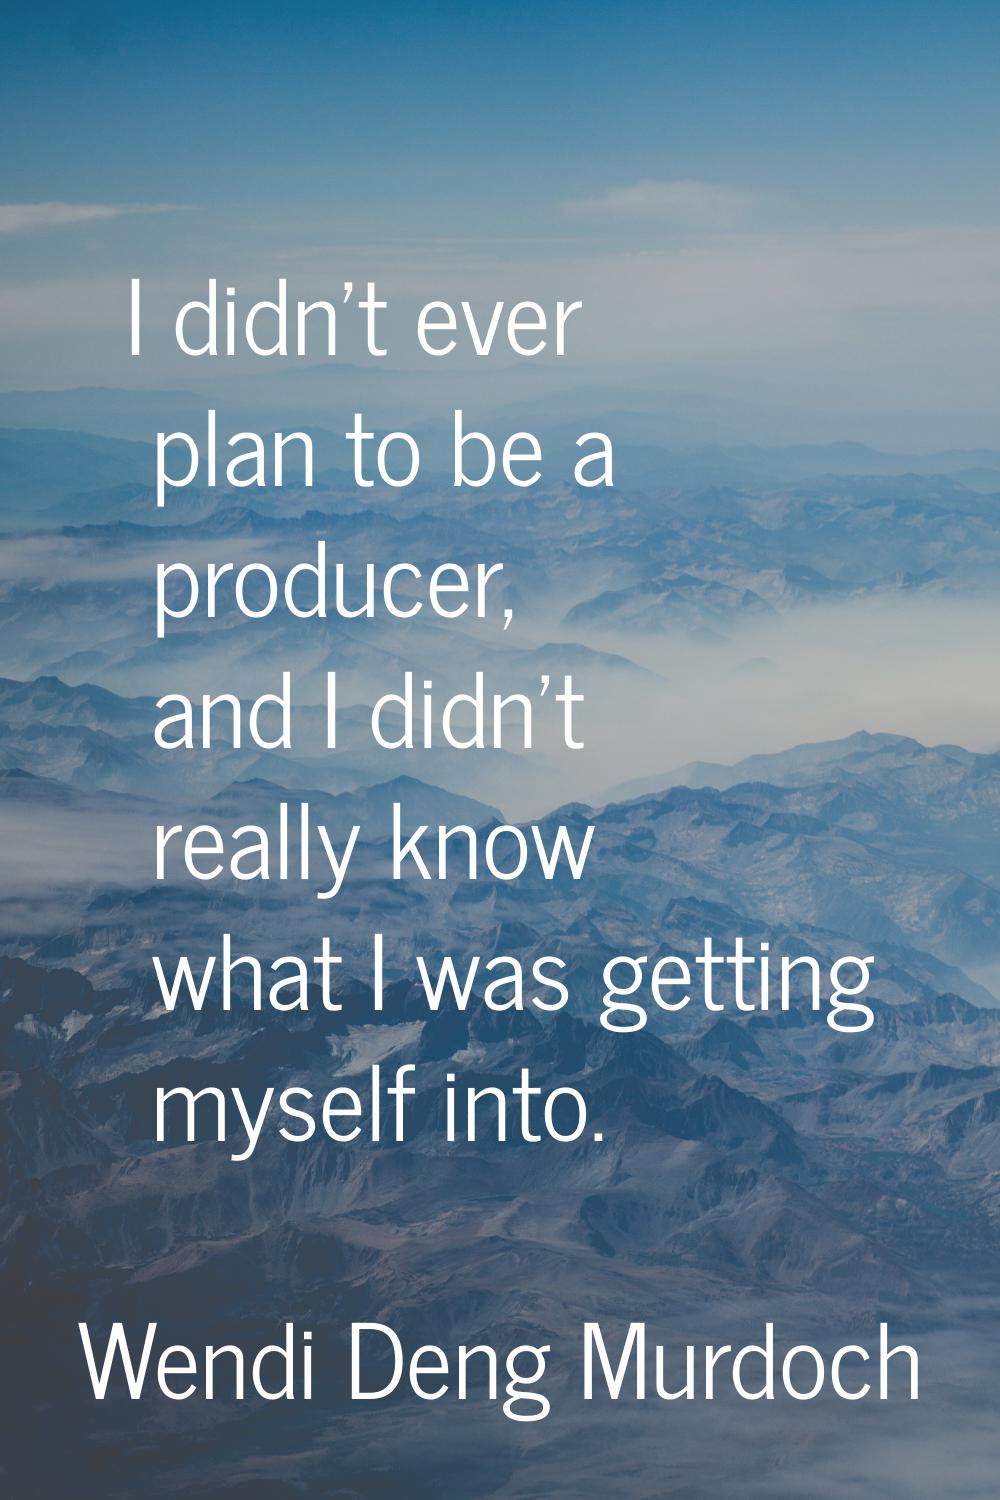 I didn't ever plan to be a producer, and I didn't really know what I was getting myself into.